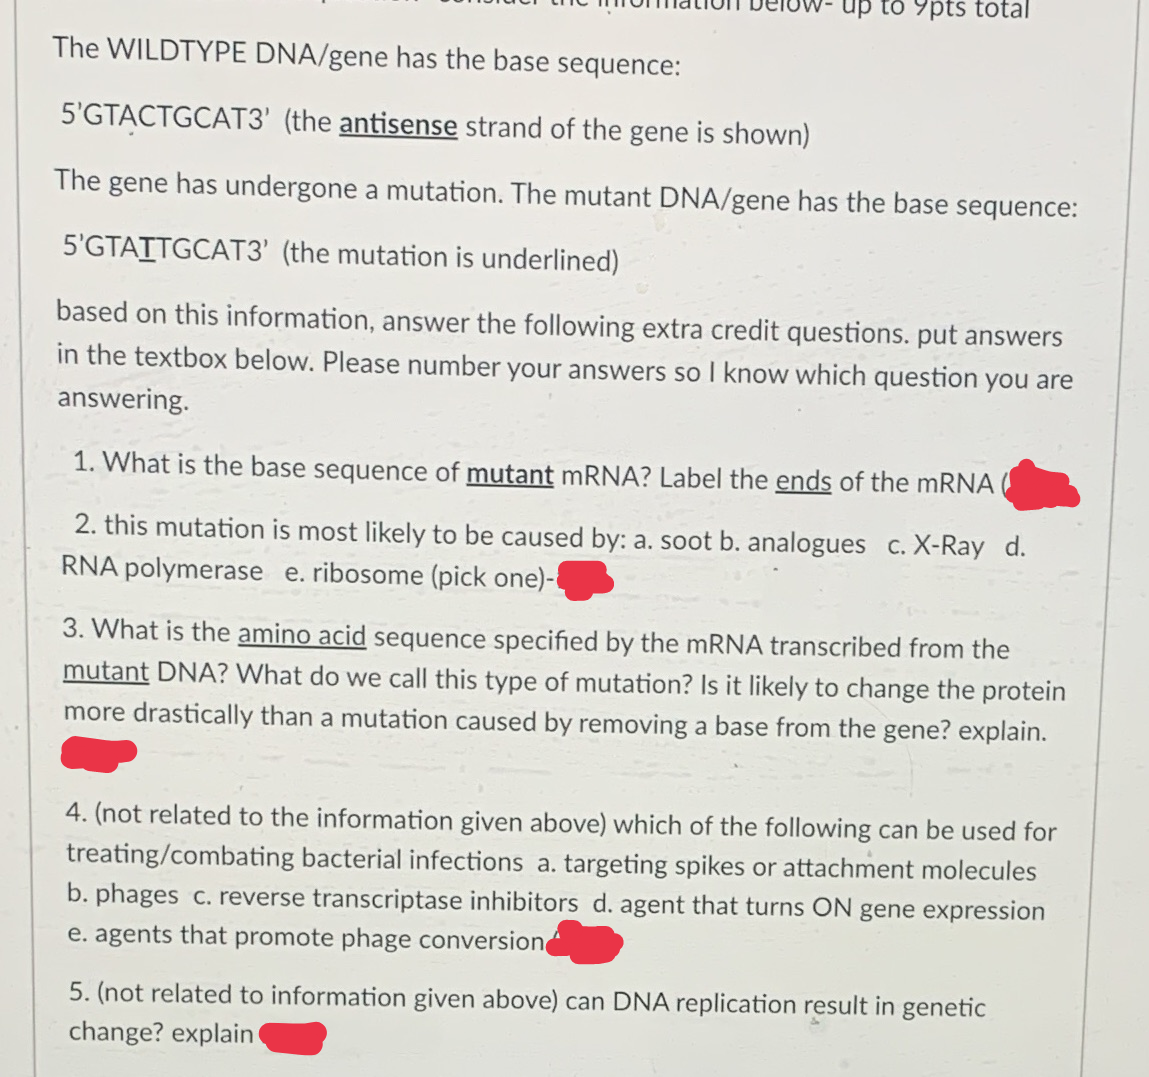 up to 9pts total
The WILDTYPE DNA/gene has the base sequence:
5'GTACTGCAT3' (the antisense strand of the gene is shown)
The gene has undergone a mutation. The mutant DNA/gene has the base sequence:
5'GTAITGCAT3' (the mutation is underlined)
based on this information, answer the following extra credit questions. put answers
in the textbox below. Please number your answers so I know which question you are
answering.
1. What is the base sequence of mutant mRNA? Label the ends of the mRNA
2. this mutation is most likely to be caused by: a. soot b. analogues c. X-Ray d.
RNA polymerase e. ribosome (pick one)-
3. What is the amino acid sequence specified by the mRNA transcribed from the
mutant DNA? What do we call this type of mutation? Is it likely to change the protein
more drastically than a mutation caused by removing a base from the gene? explain.
4. (not related to the information given above) which of the following can be used for
treating/combating bacterial infections a. targeting spikes or attachment molecules
b. phages c. reverse transcriptase inhibitors d. agent that turns ON gene expression
e. agents that promote phage conversion
5. (not related to information given above) can DNA replication result in genetic
change? explain